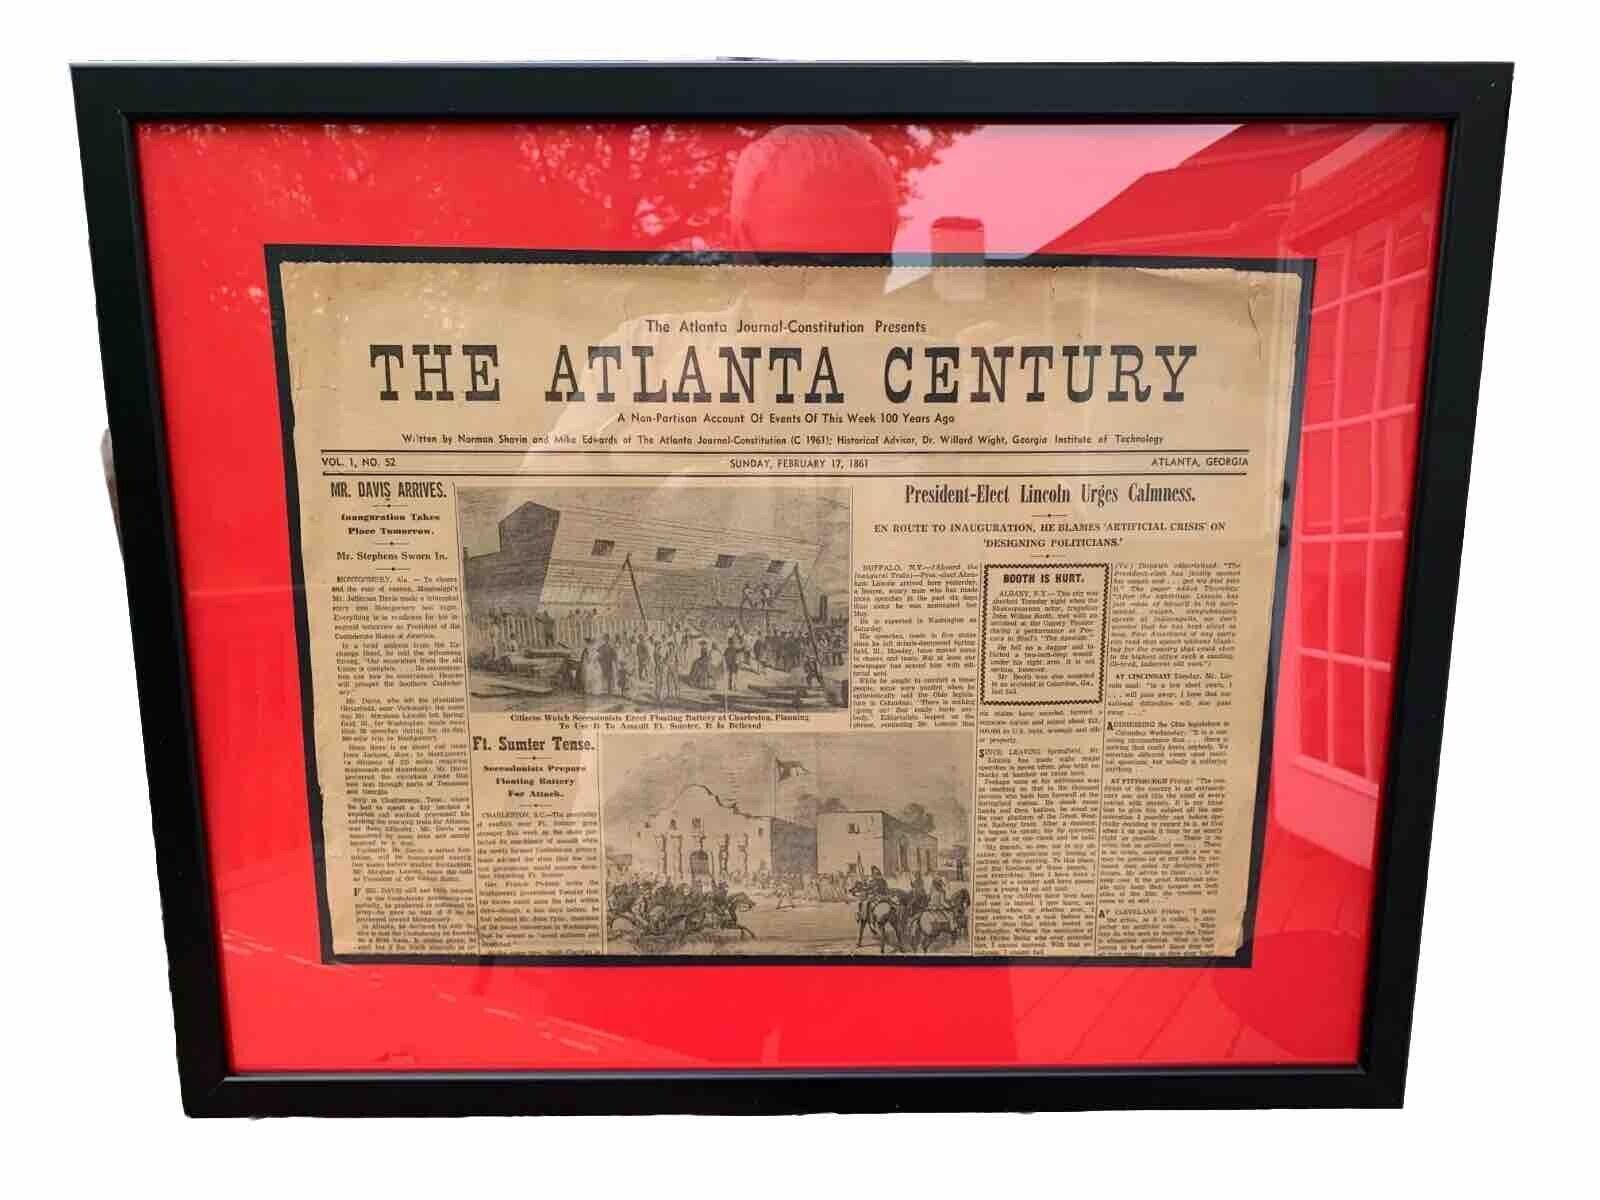 A FRAMED ATLANTA CENTURY REPRINT NEWSPAPER ABOUT PRESIDENT -ELECT LINCOLN